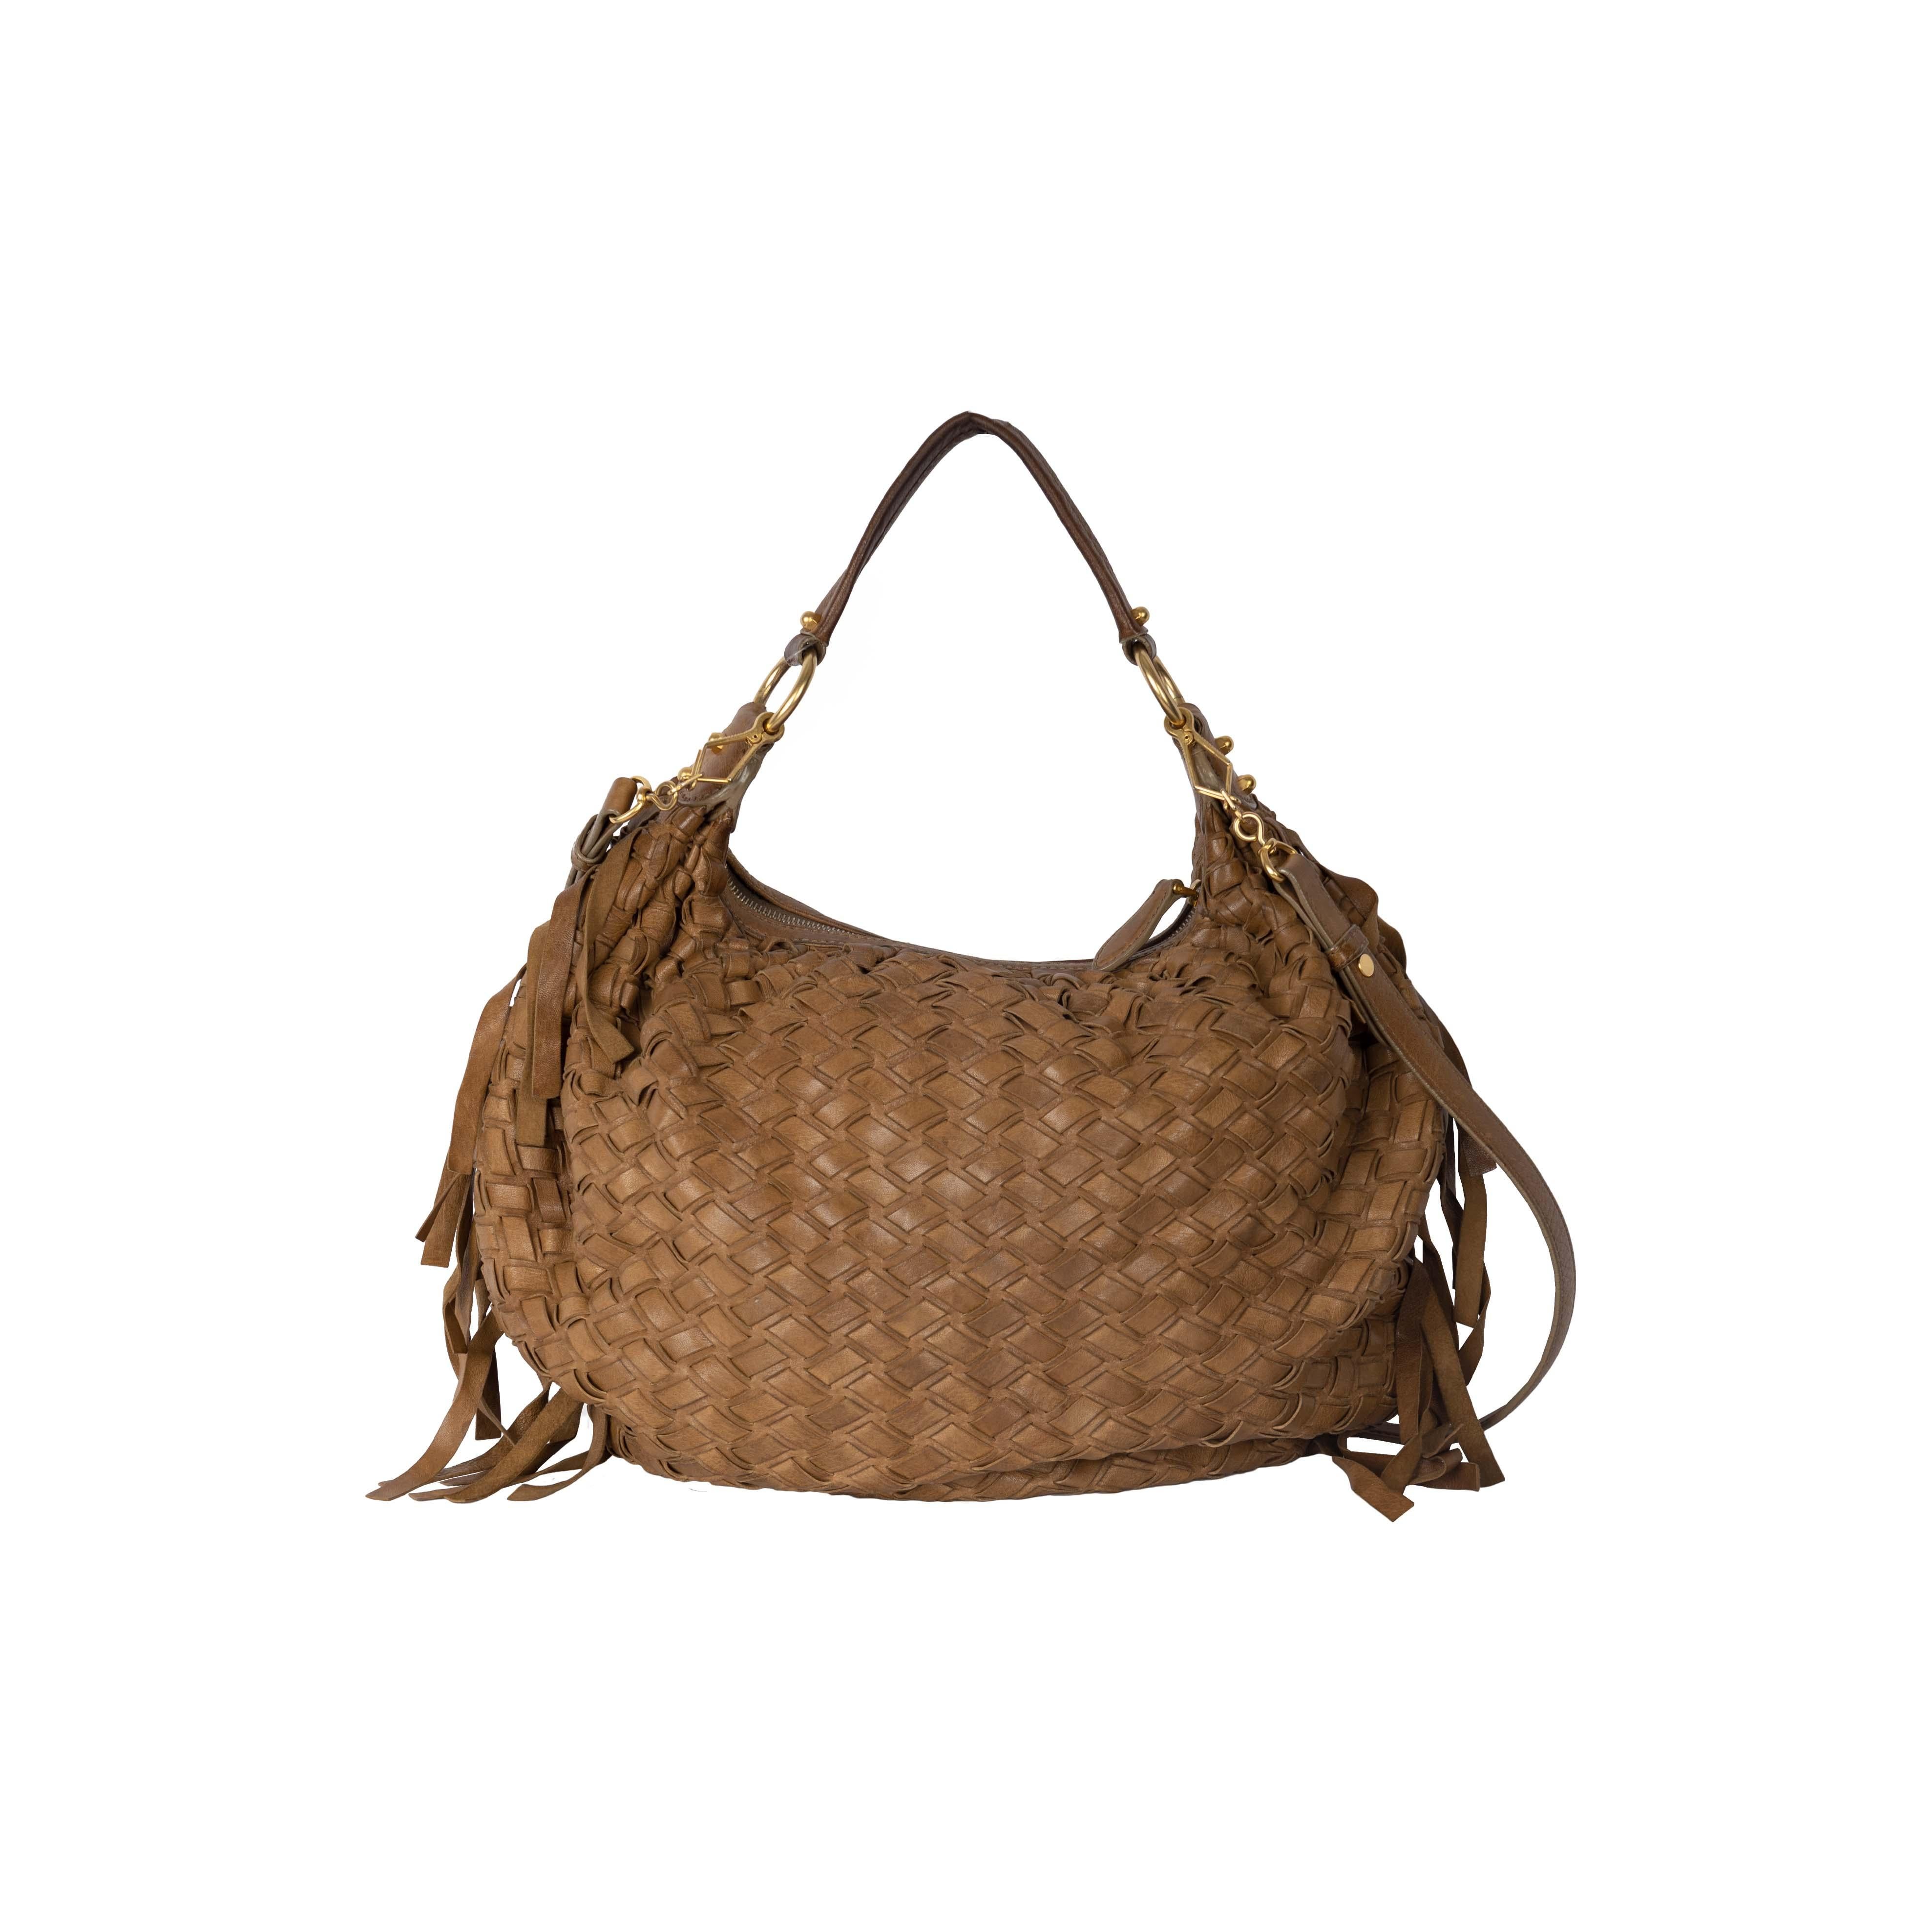 The Miu Miu Woven Leather Fringe Hobo features panels interwoven with a hobo bag structure. Adding the Miu Miu touch, the corners have frills attached. The bag can be handled as a purse with a short strap or can be worn crossbody with a long